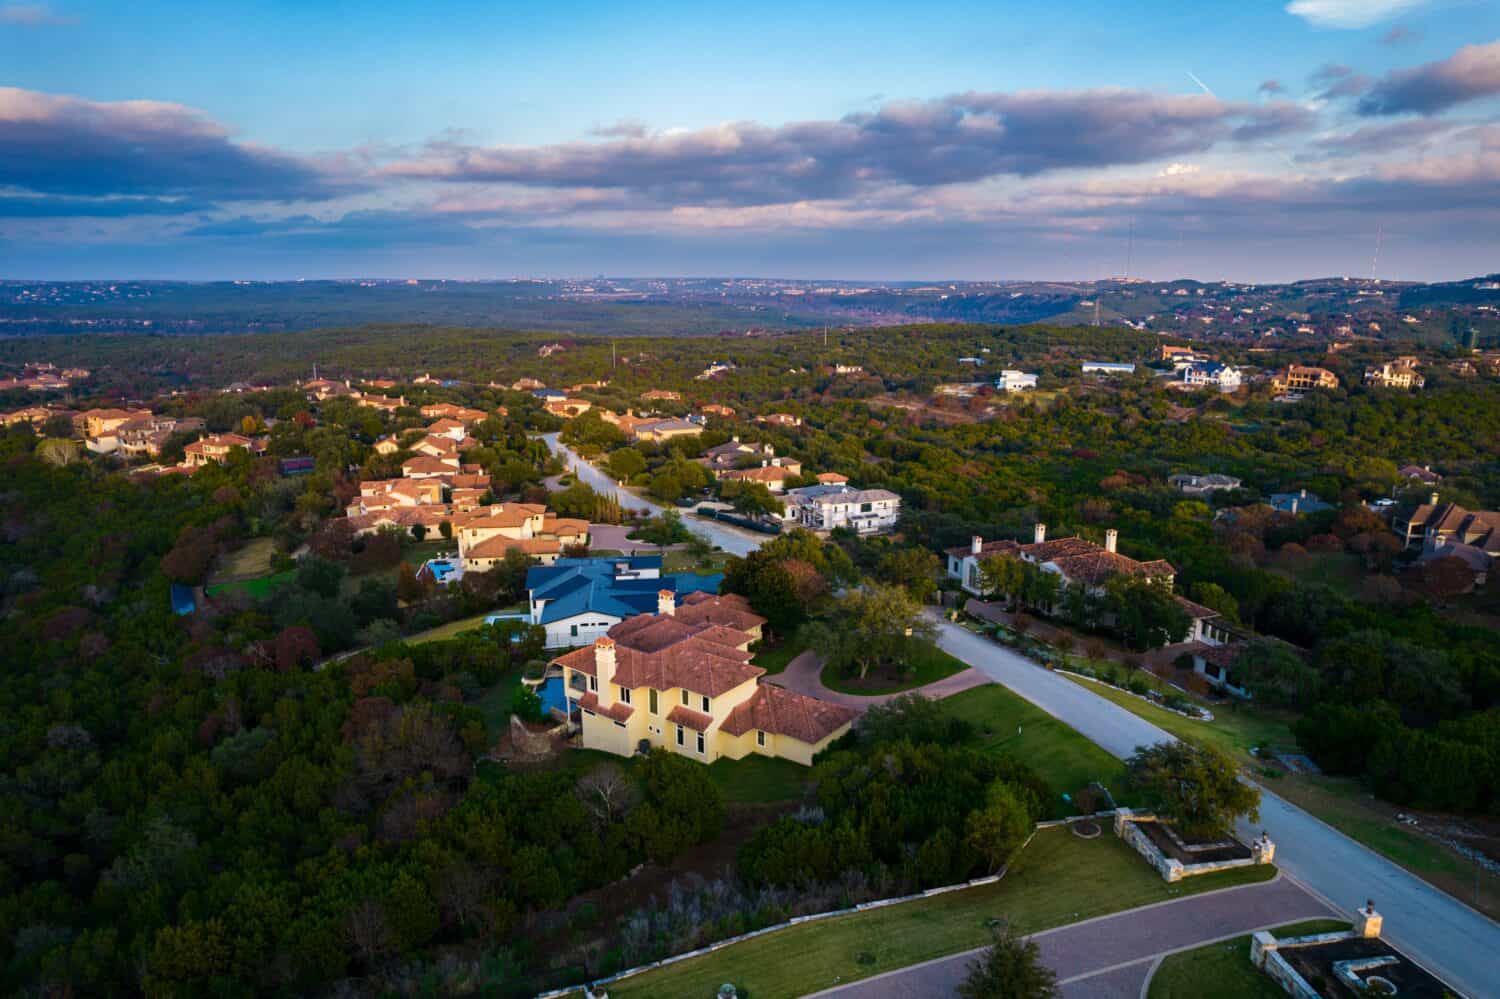 huge mansion homes aboe barton creek west hills of Austin Texas Sunset above rooftops and houses in million dollar Suburb